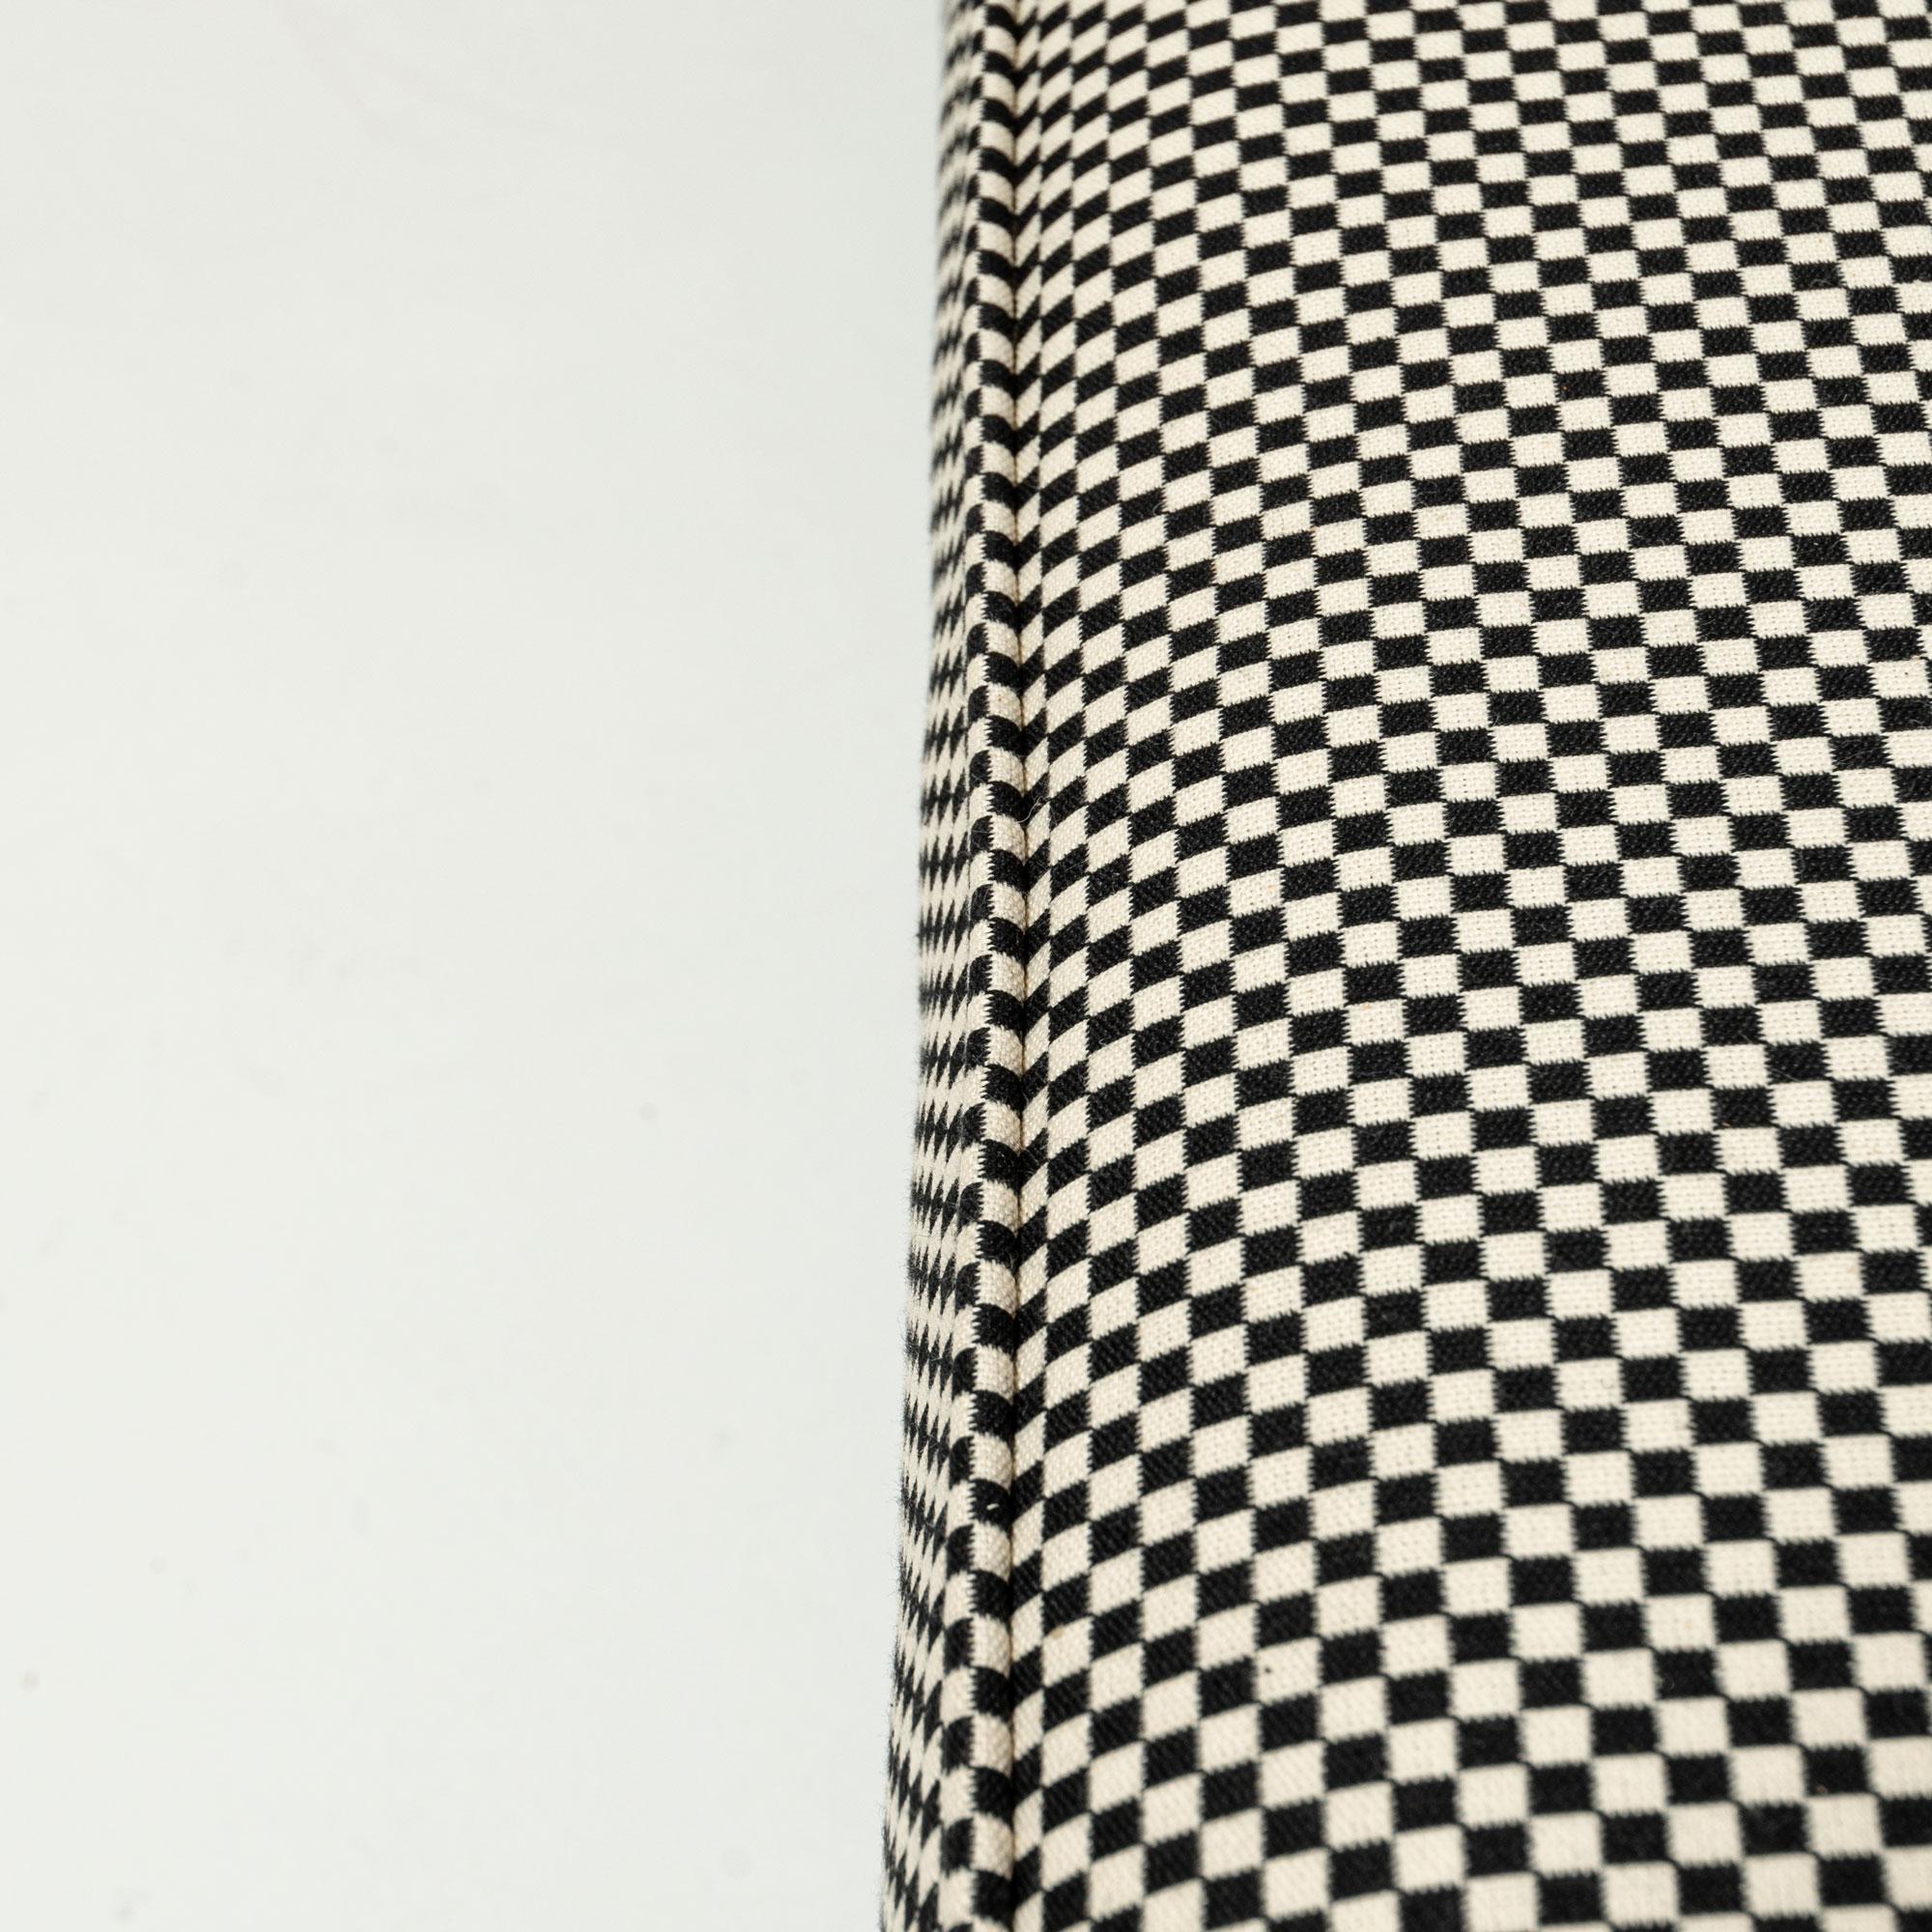 Mid-20th Century George Nelson Modular Seating System Bench in Alexander Girard Checker Fabric For Sale